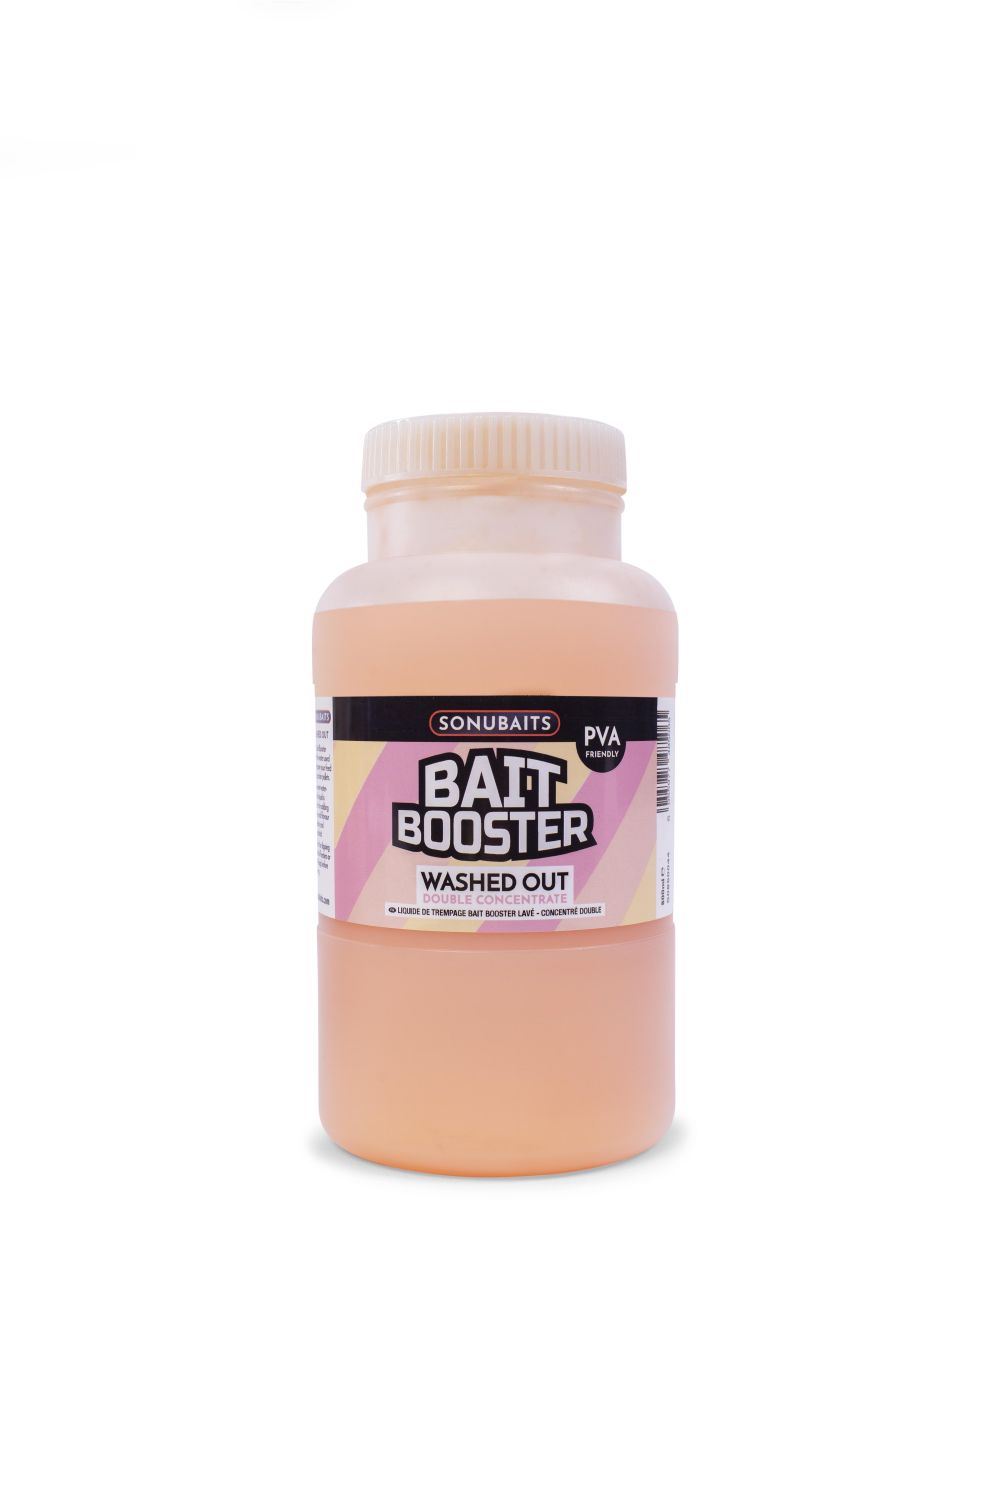 Bait Booster Washed out